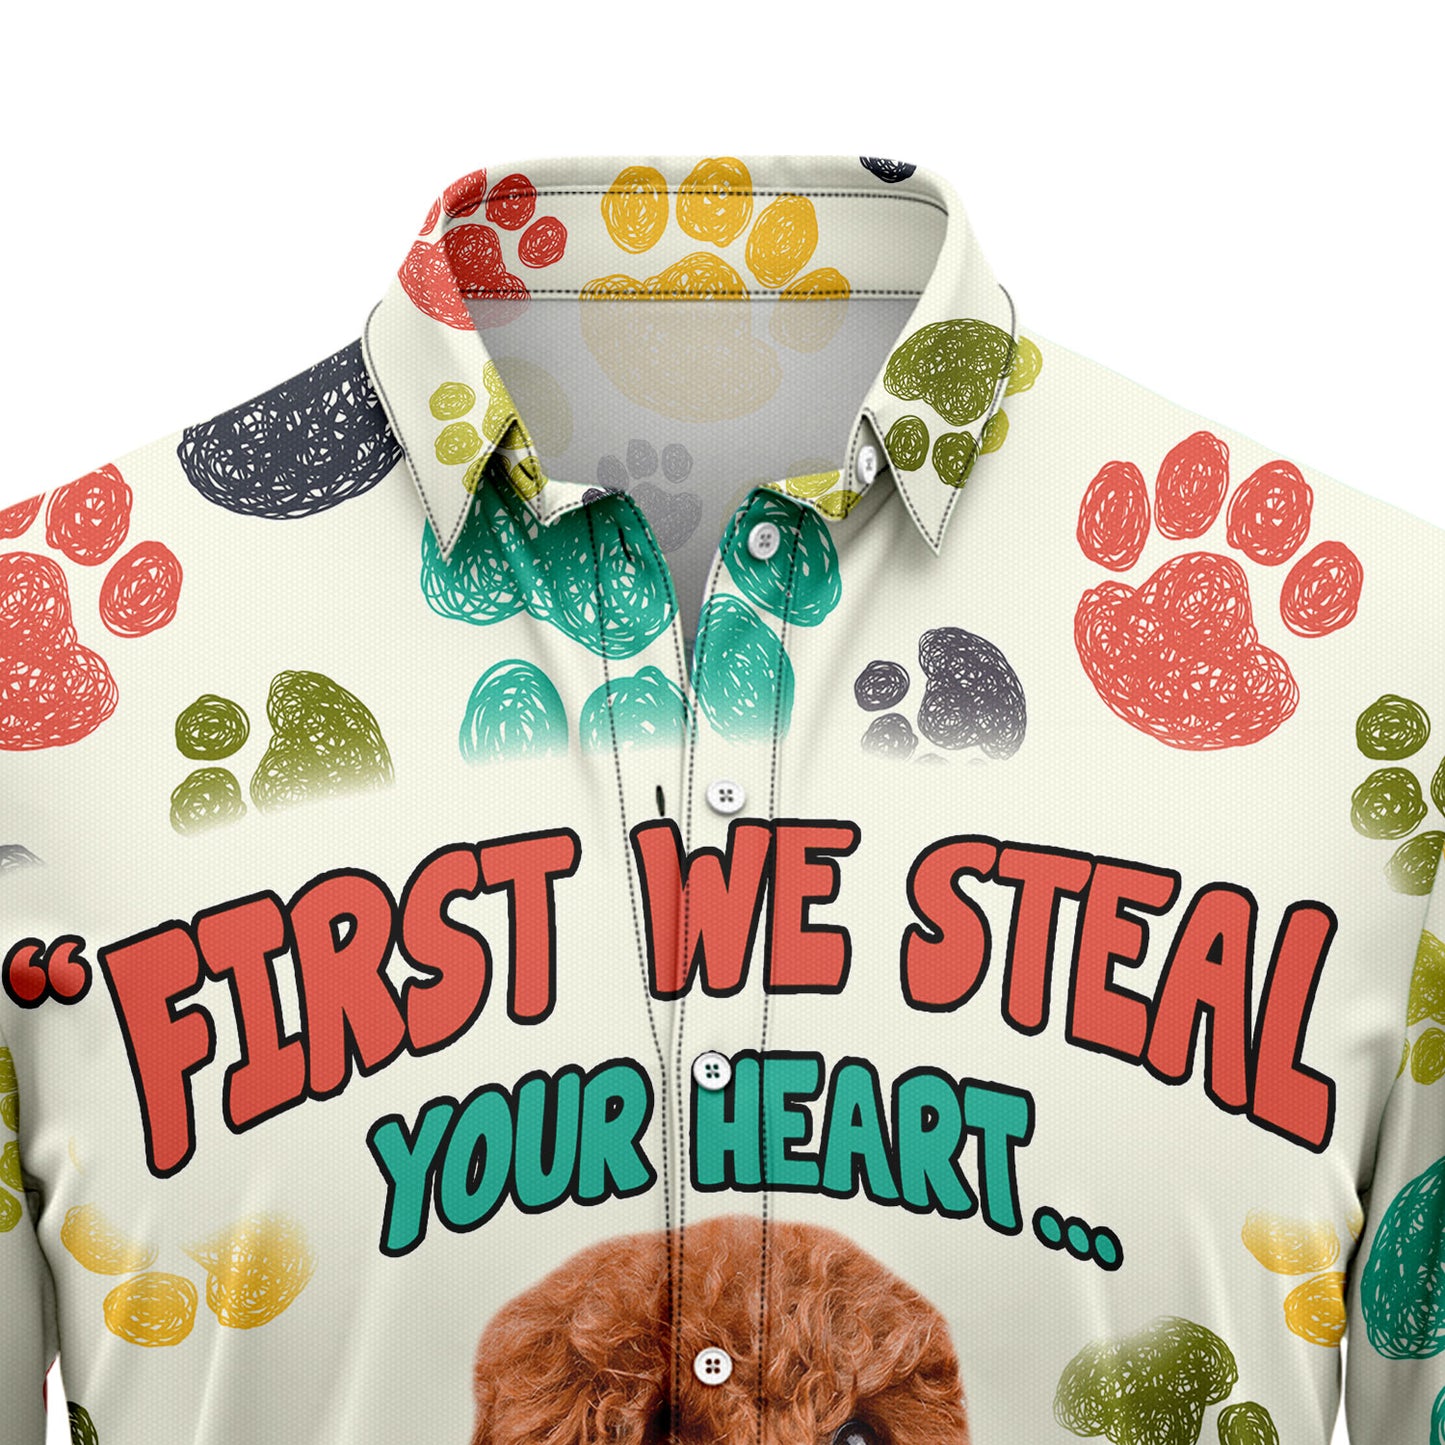 Poodle Steal Your Heart H28807 Hawaiian Shirt